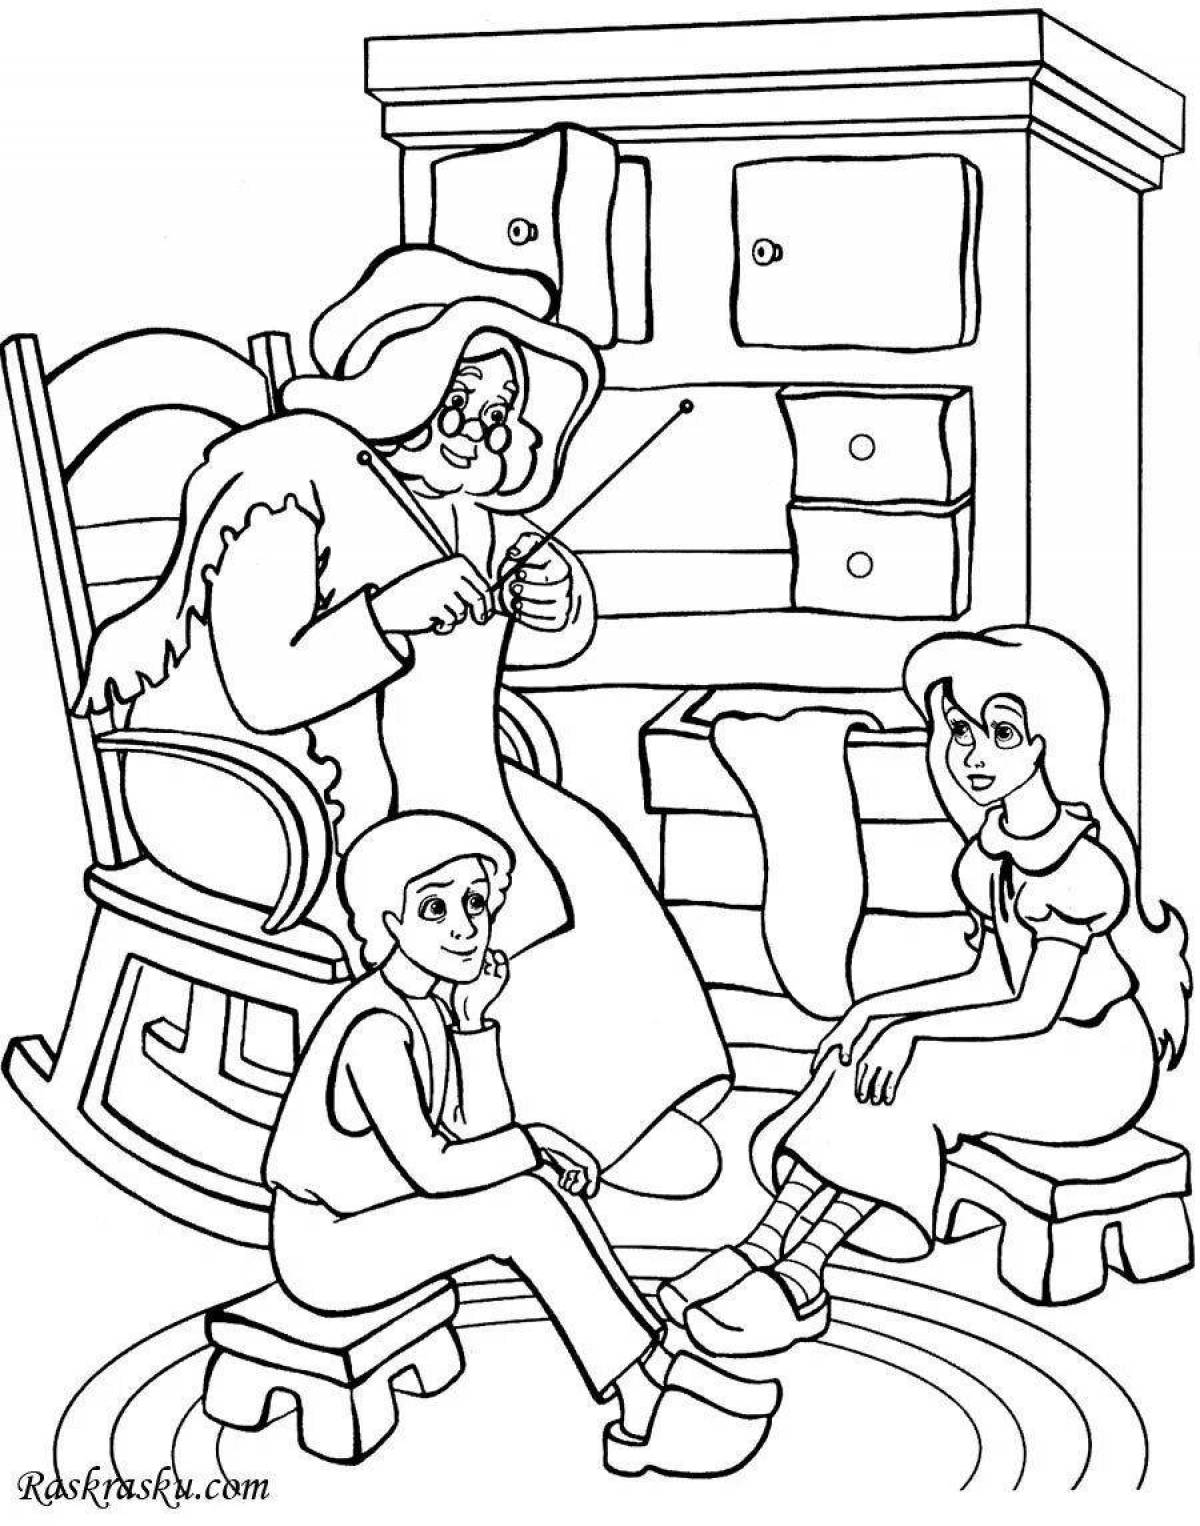 Kai and gerd's majestic coloring pages